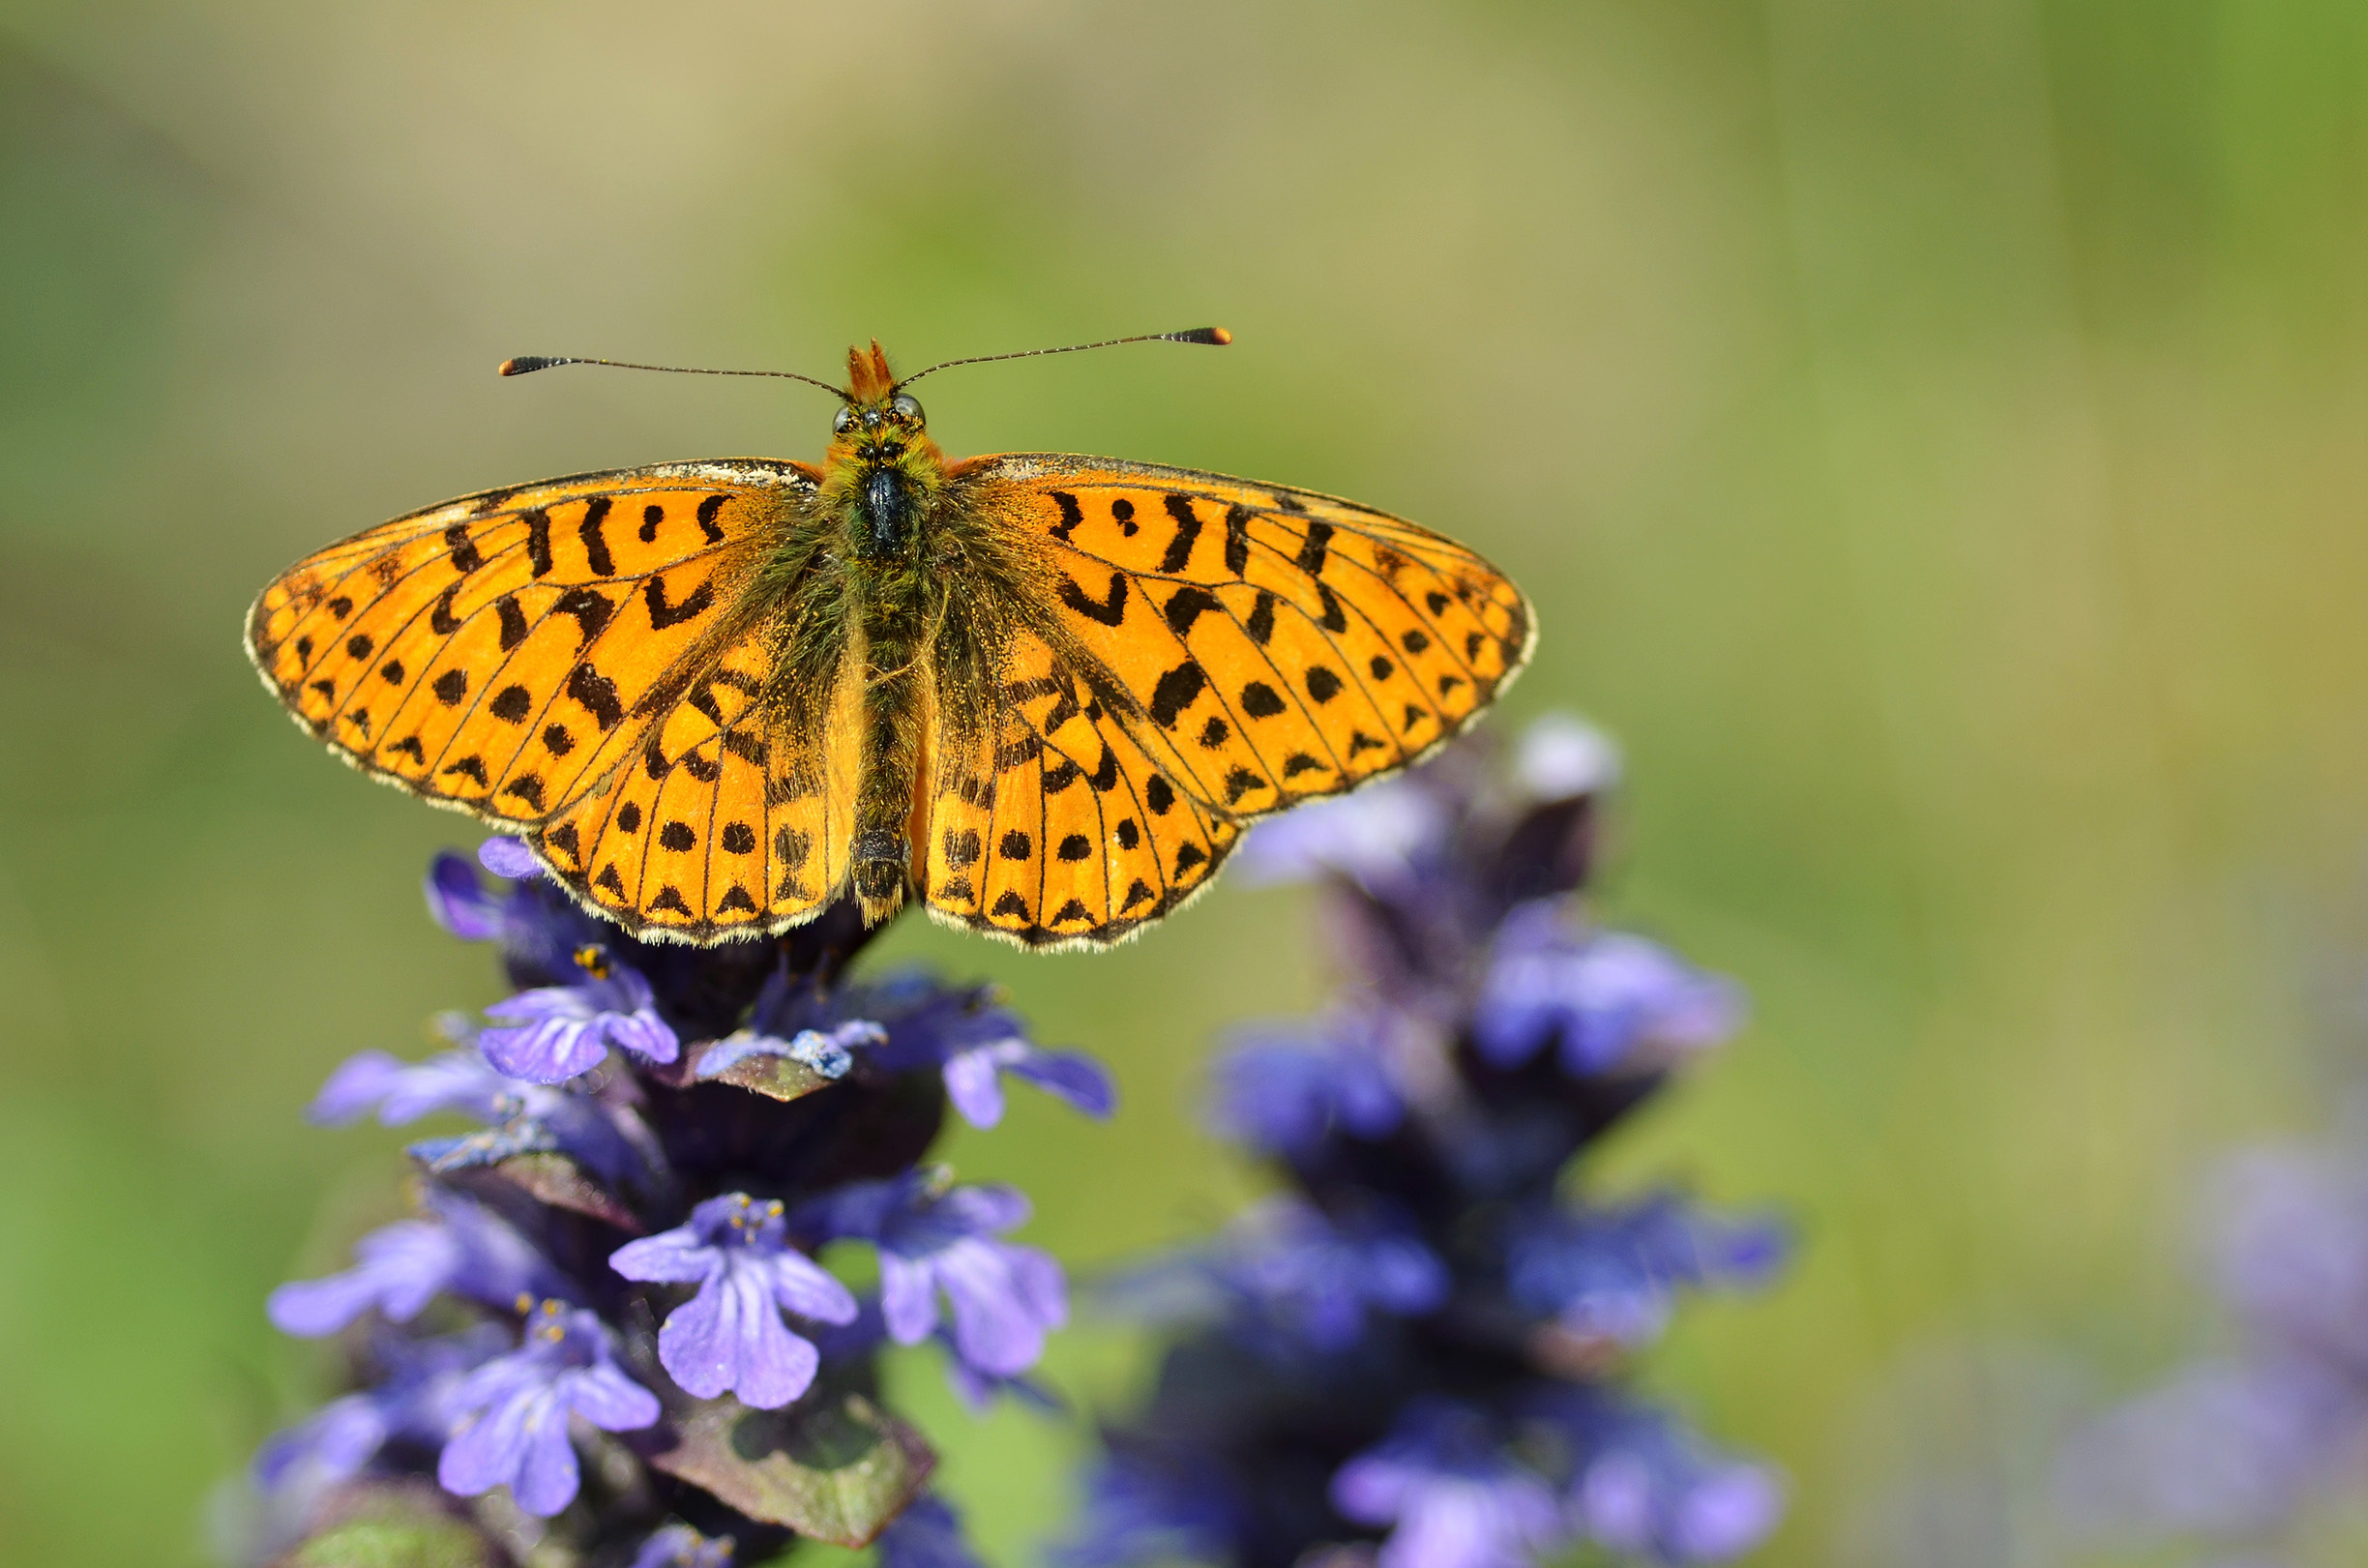 An orange butterfly basking with wings wide open on the top of a purple flower spike.